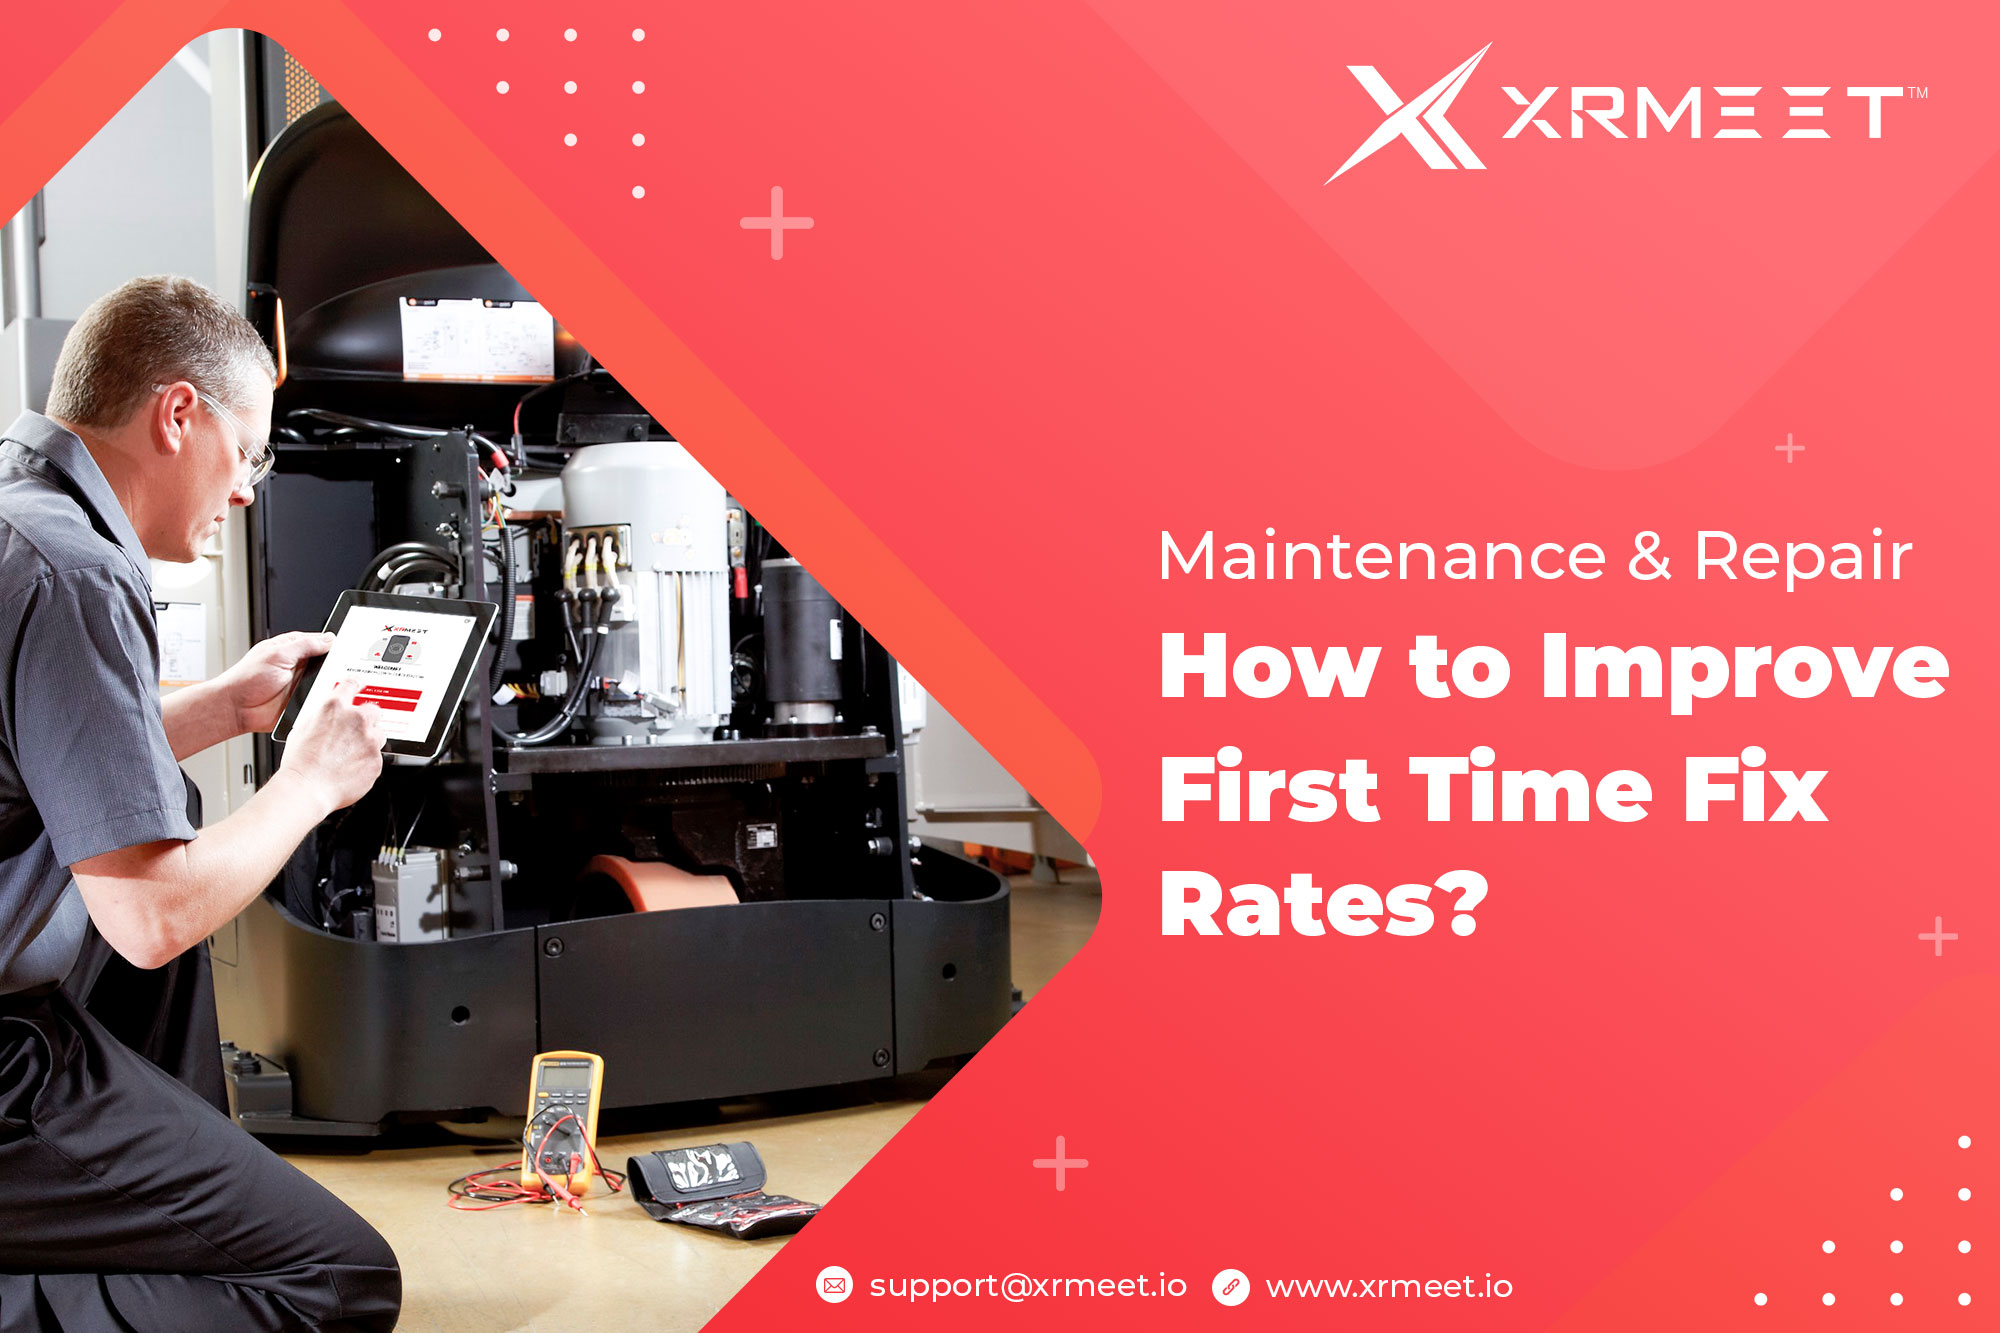  improve first time fix rates in maintenance and repair